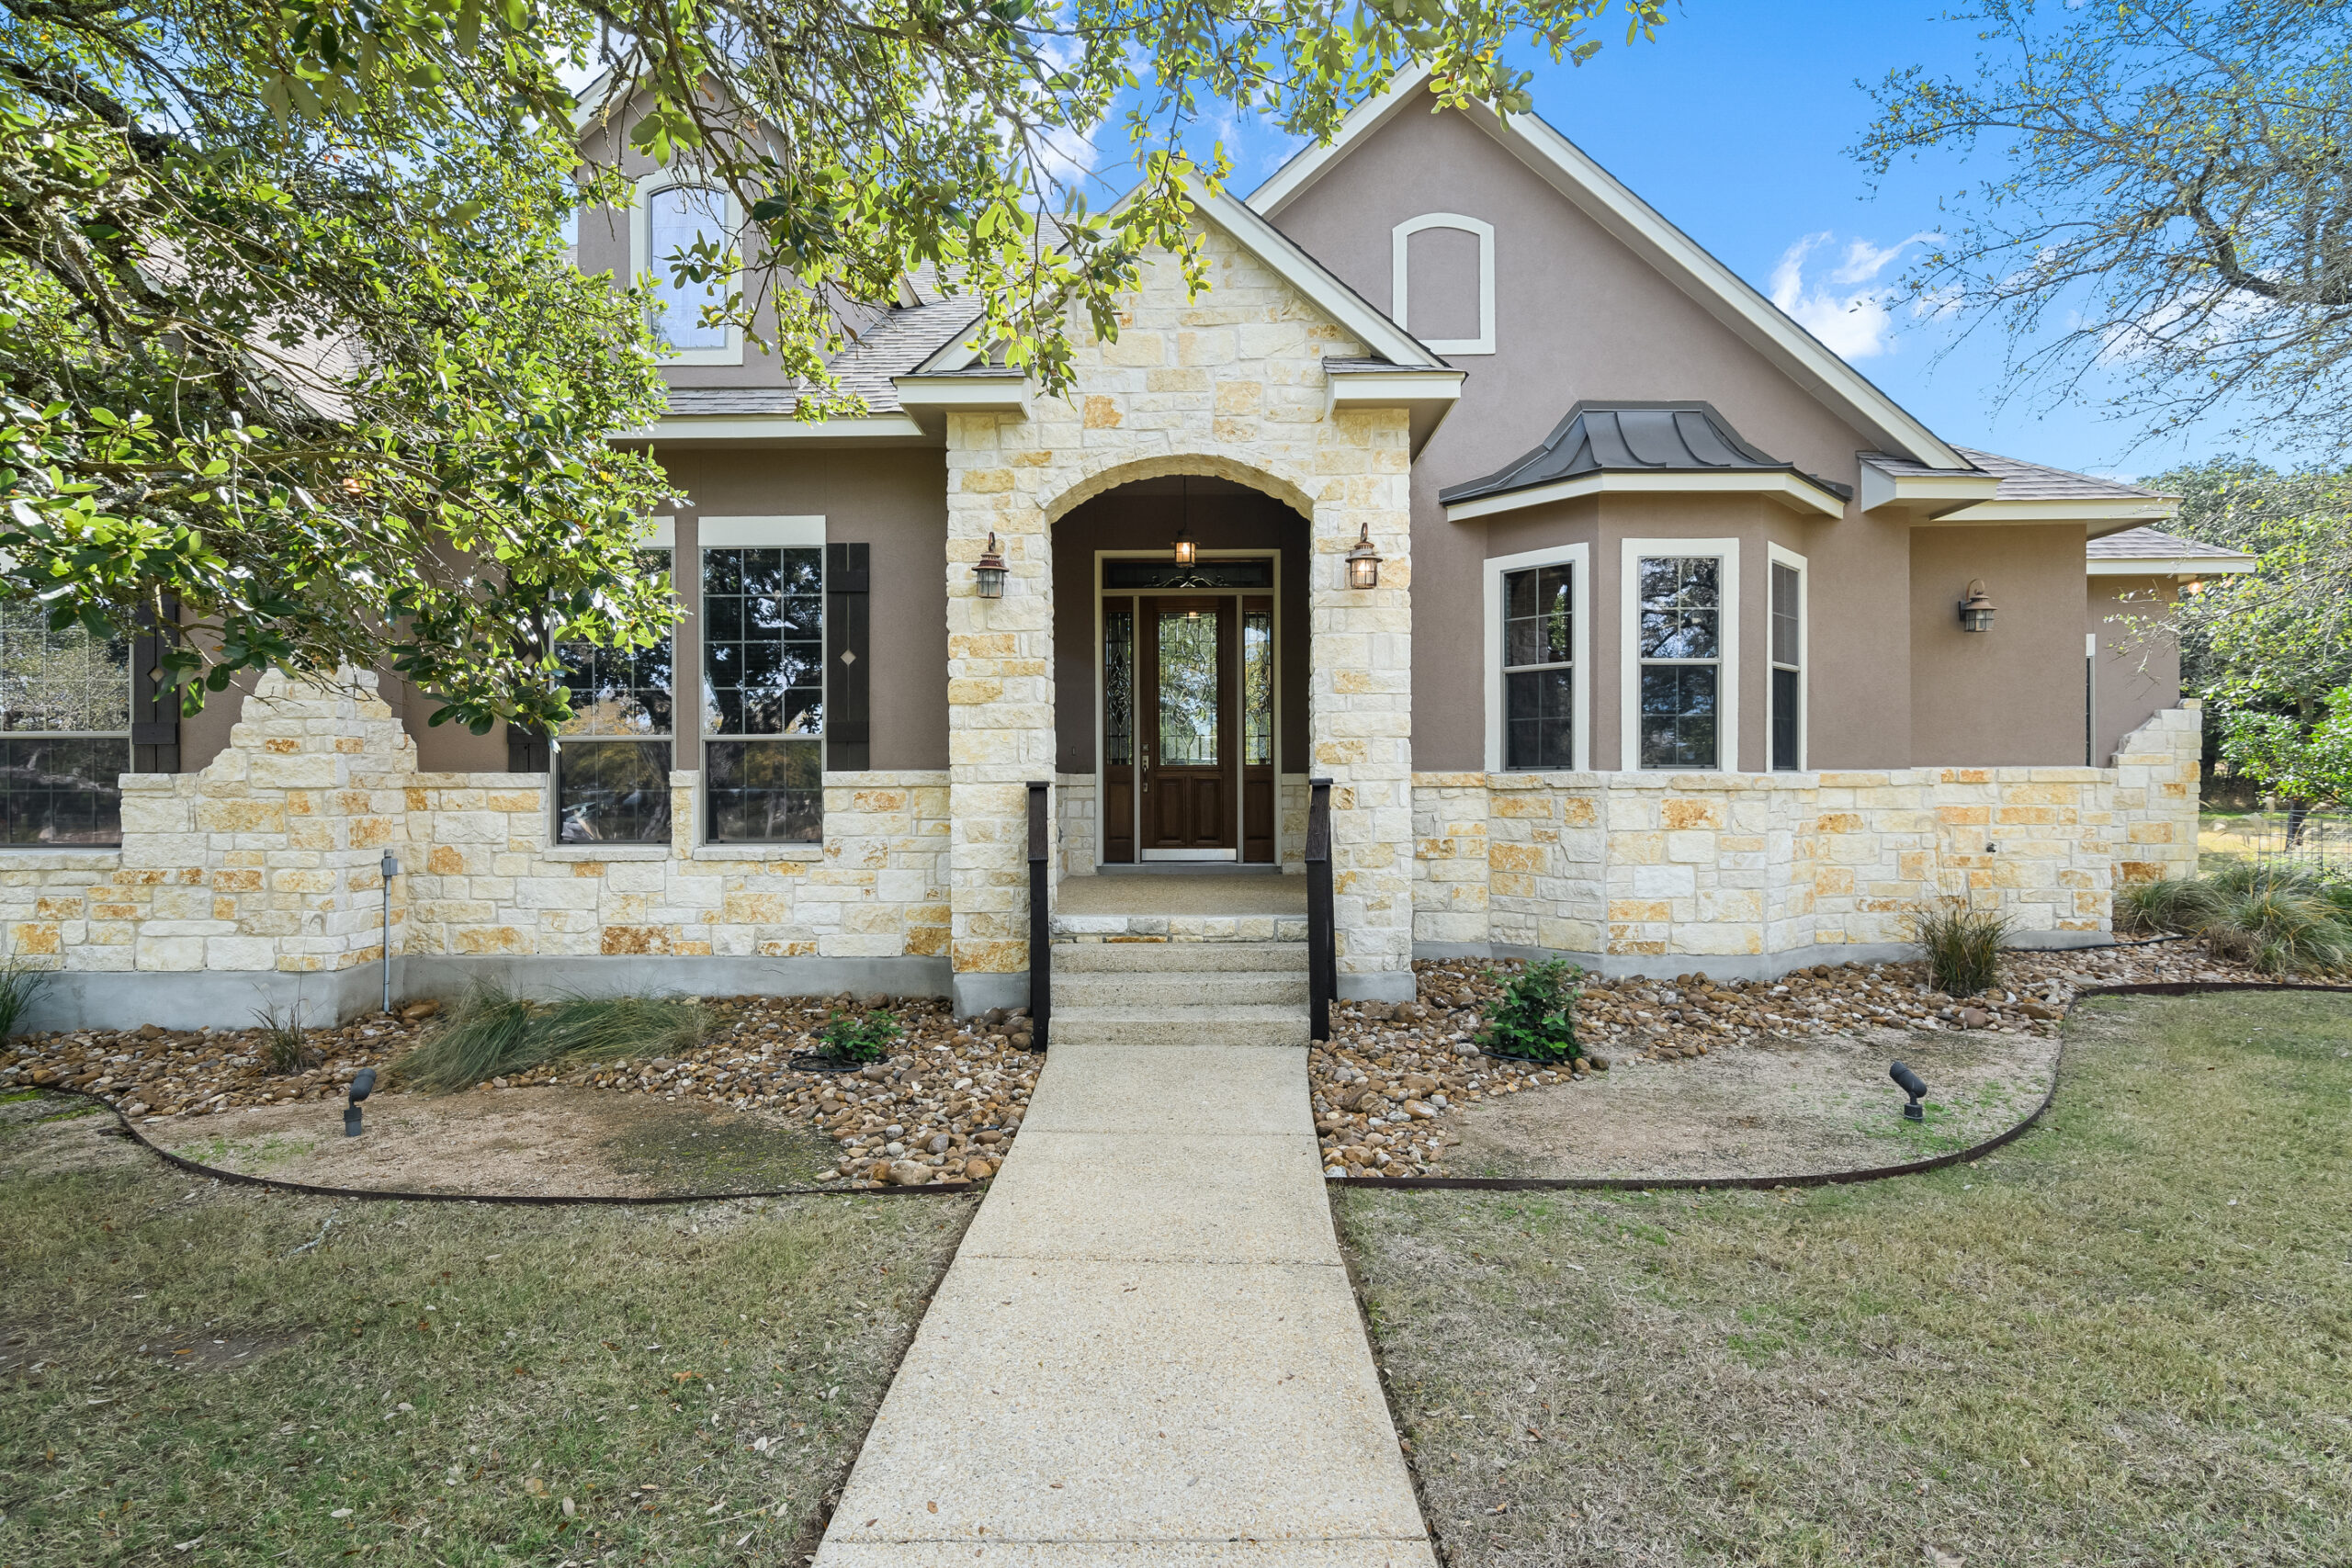 Home for Sale in Boerne TX